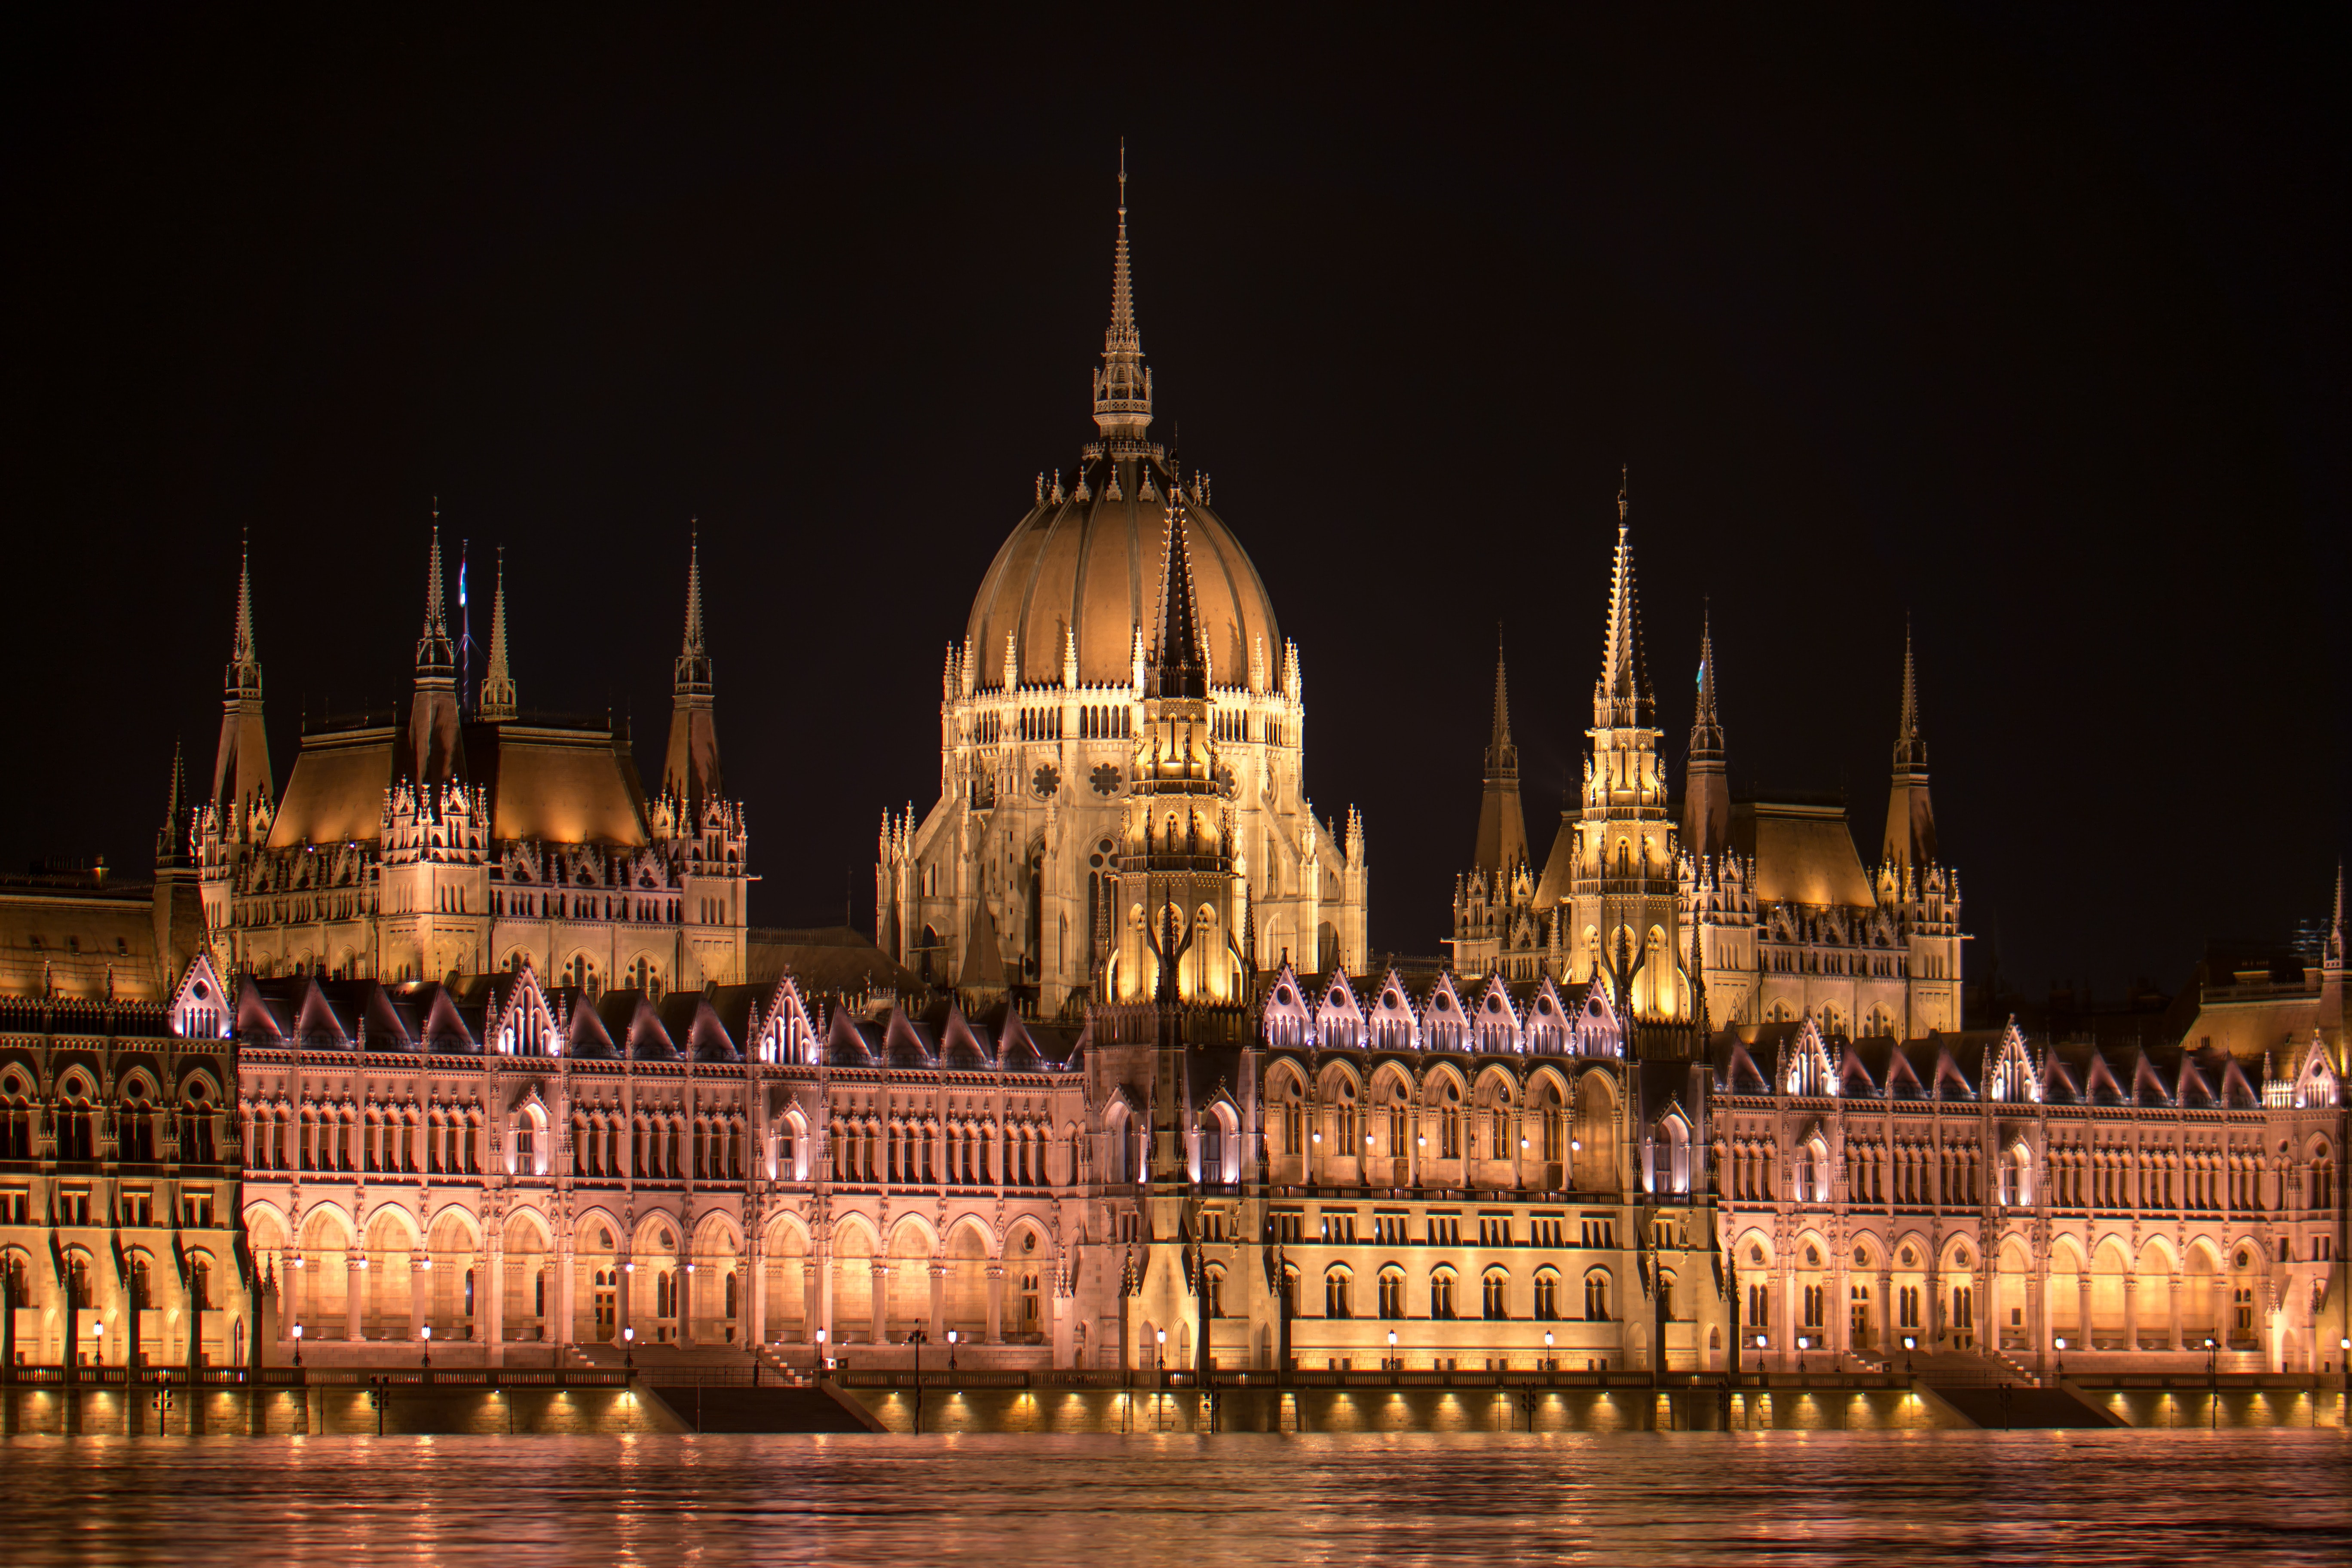 A view of the illuminated Hungarian Parliament at night in Budapest, Hungary, 17 June 2013., Alexander Kmeth/picture-alliance/dpa/AP Images